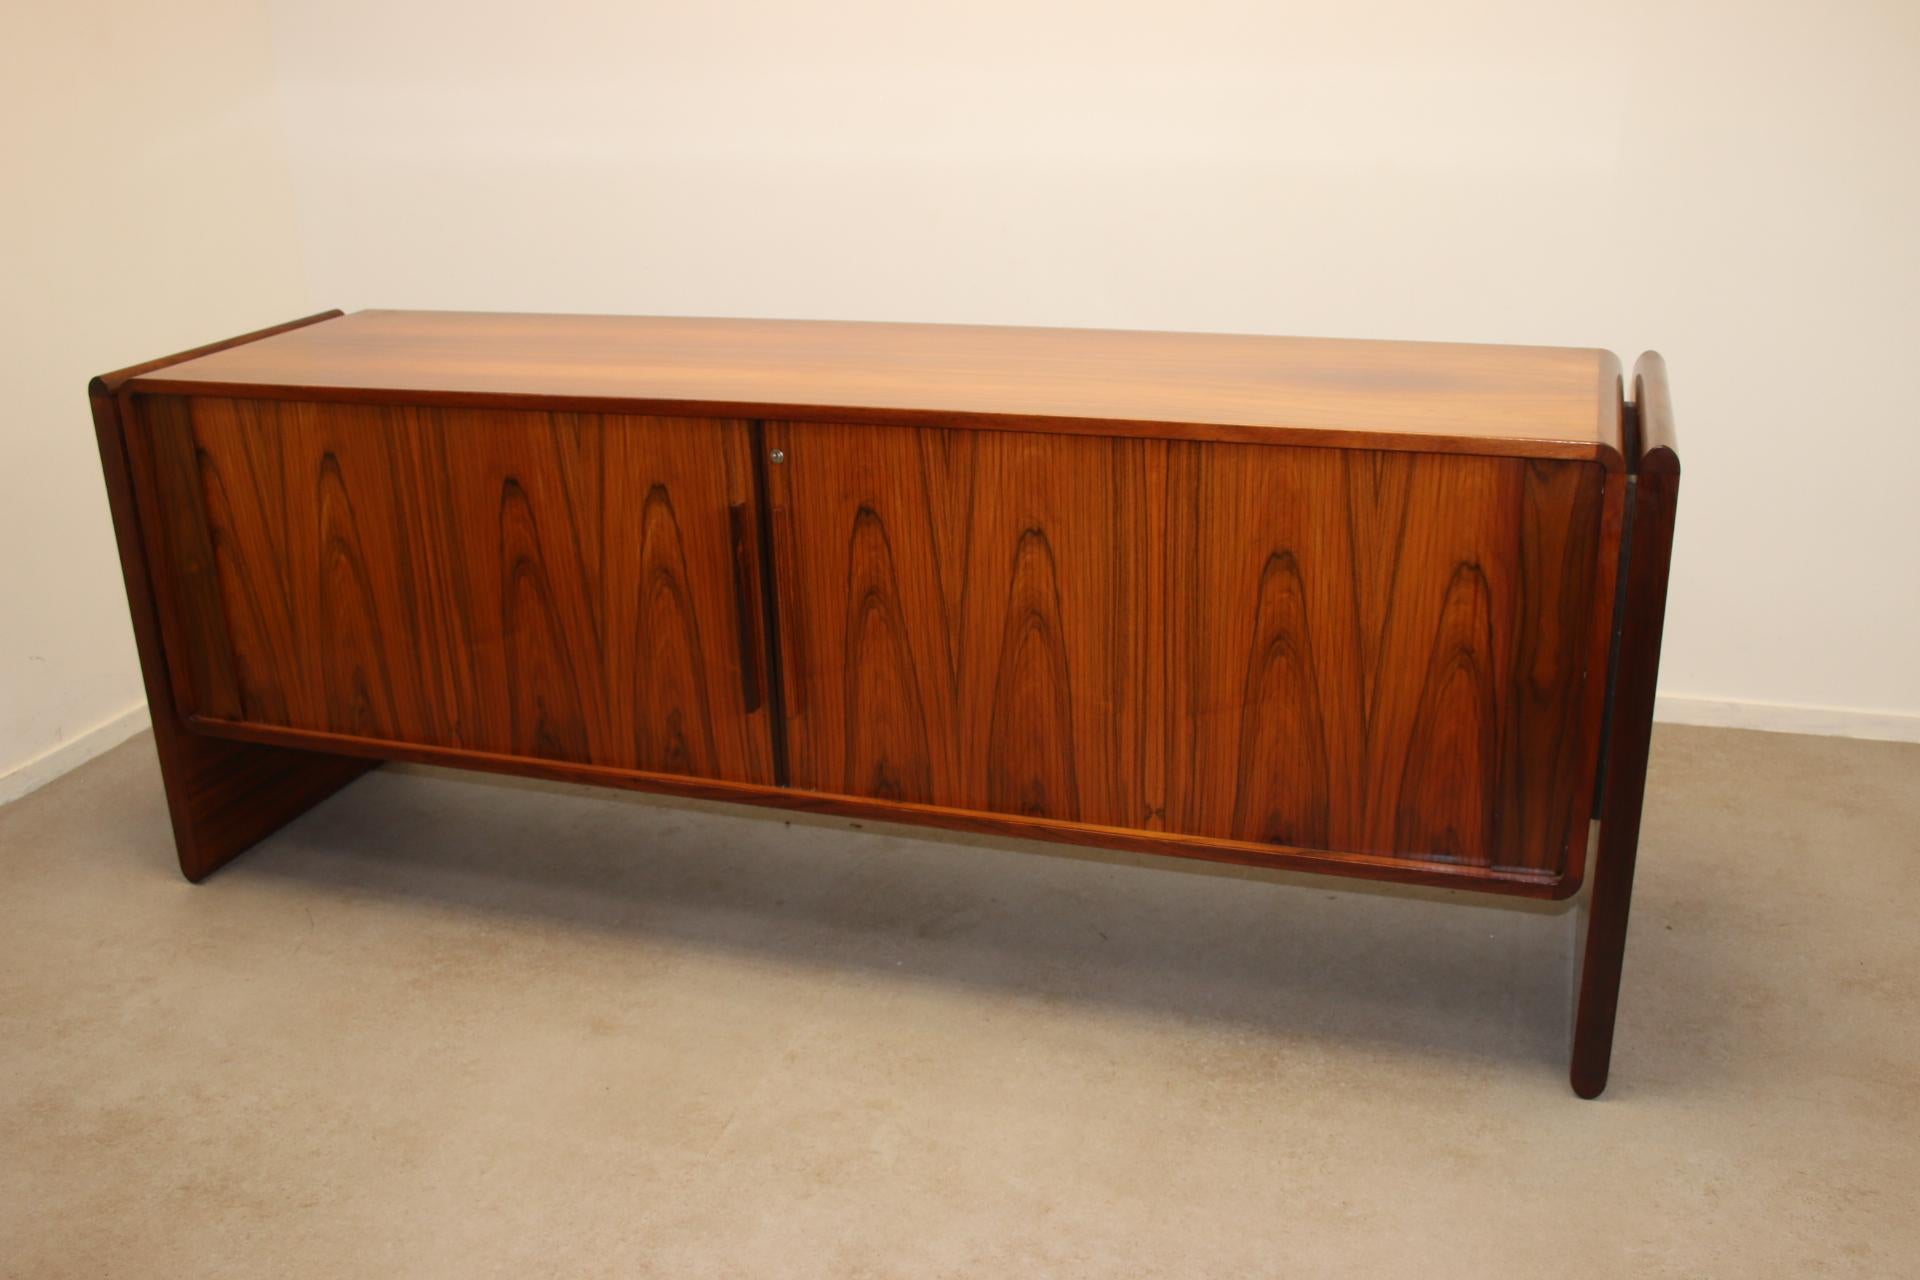 Sideboard with Roller Doors from Dyrlund - Vintage 1960s

Discover the timeless elegance of the teak sideboard with roller doors, manufactured by Dyrlund in the 1960s. This piece of furniture, made in the heart of Denmark, embodies the essence of